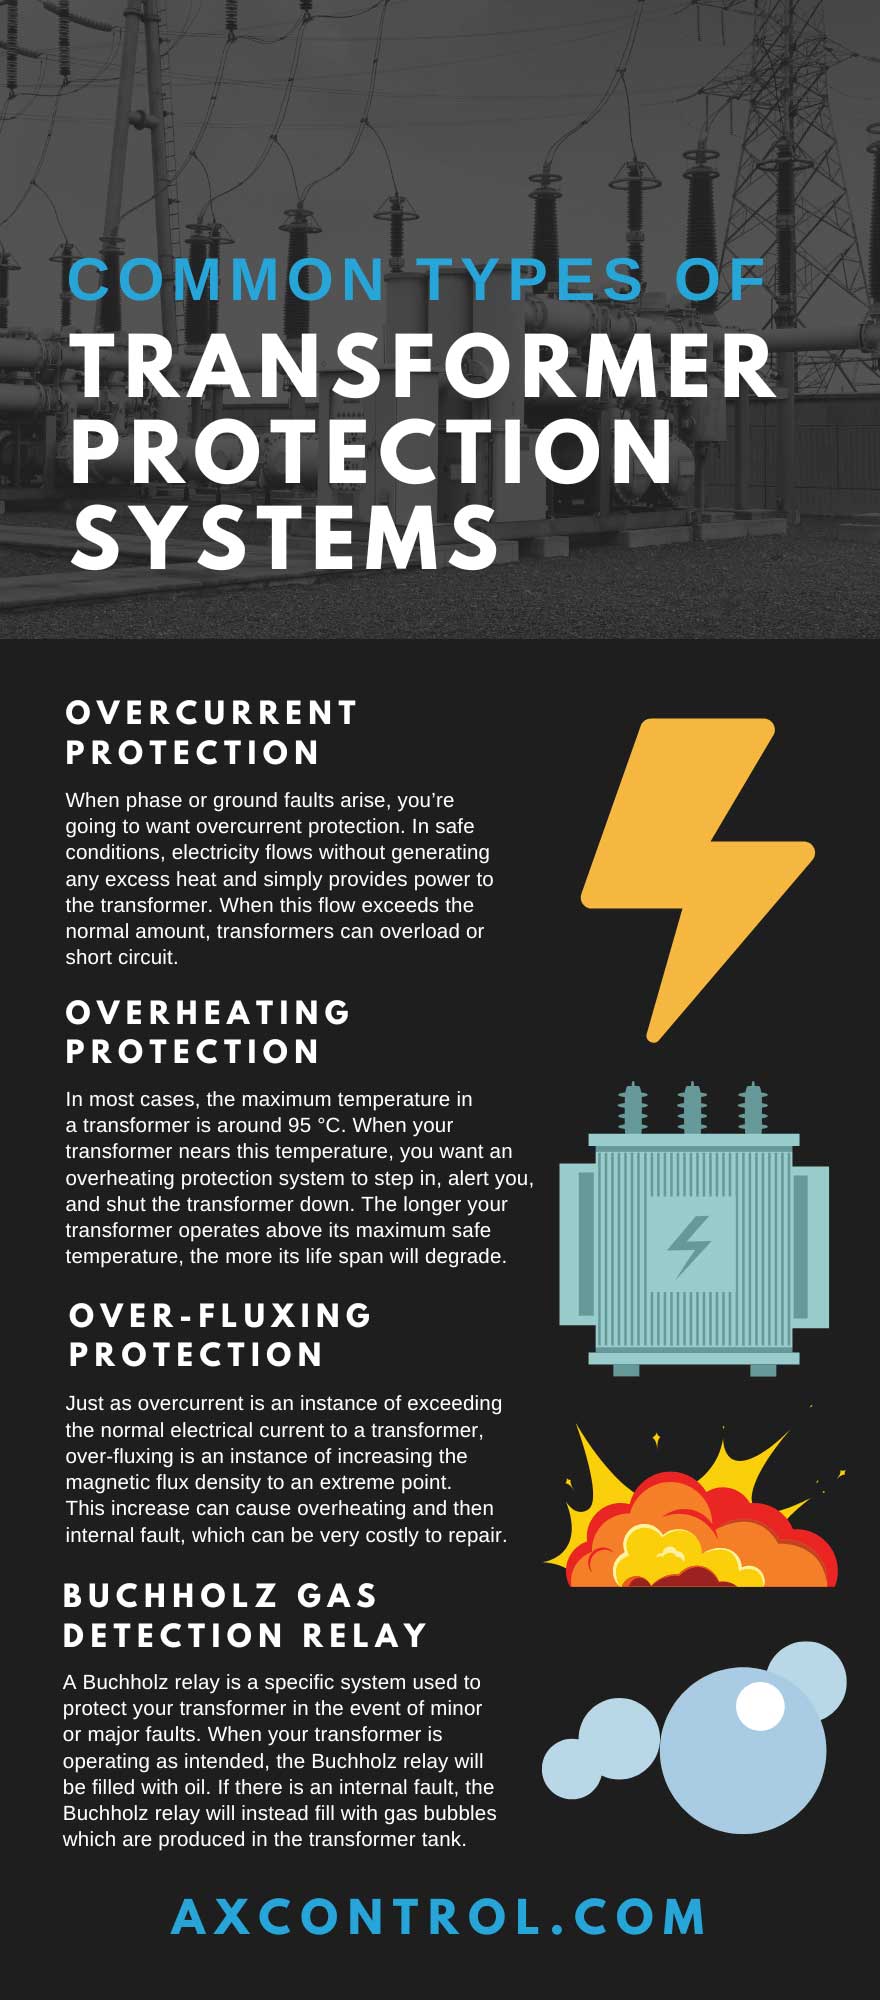 7 Common Types of Transformer Protection Systems